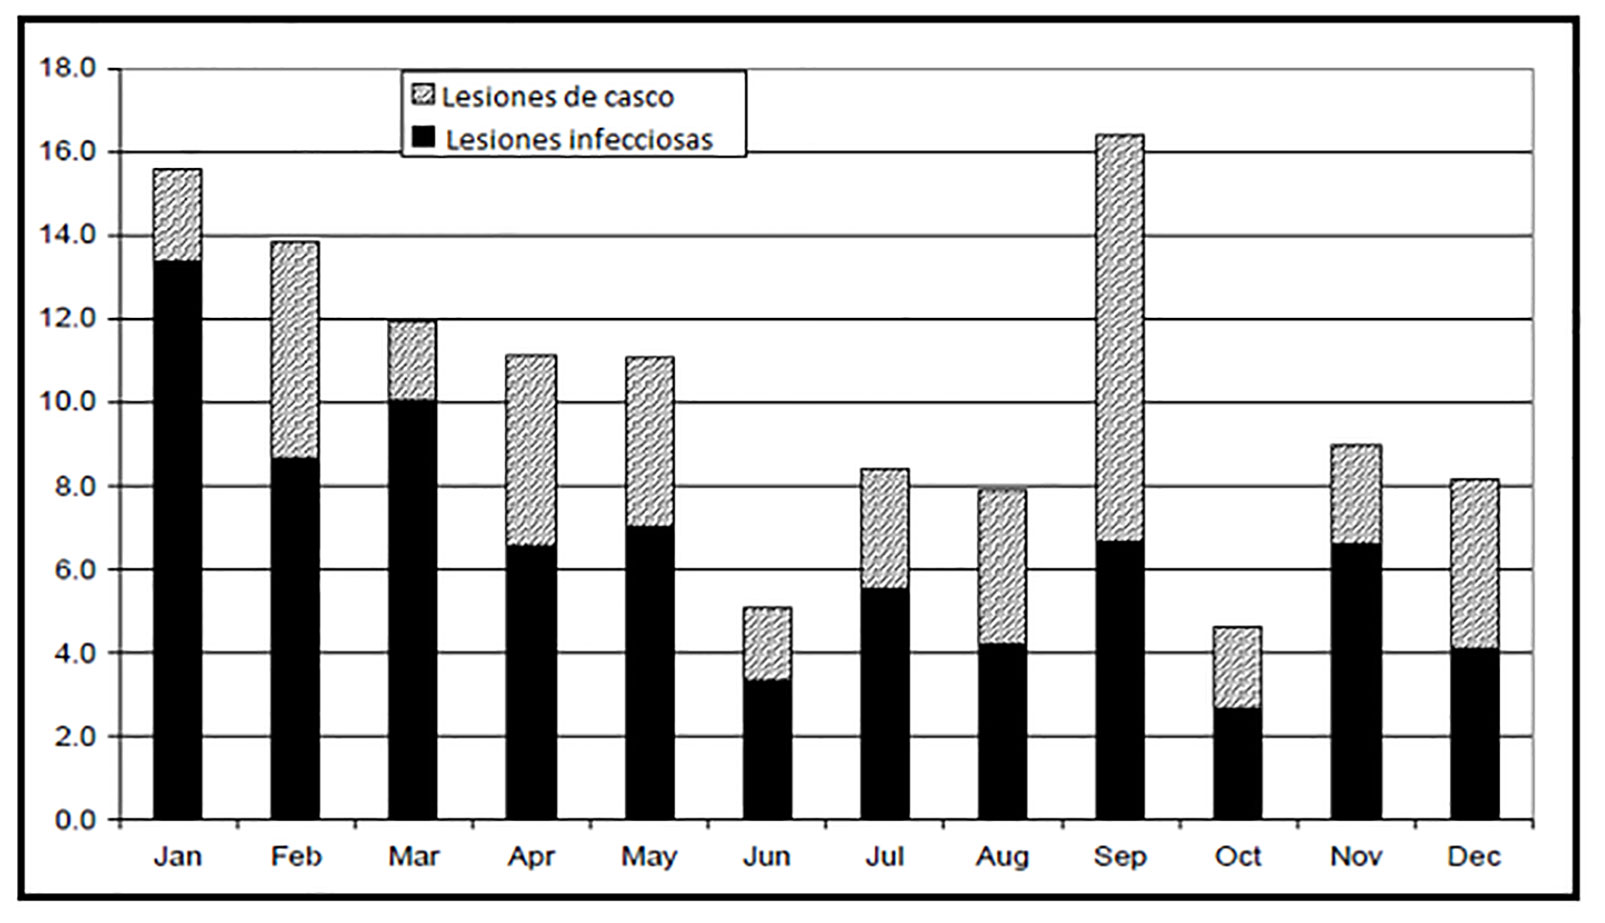 Bar graph outlining laminitis treatment in 10 herds by month and cause. For a complete description, call SDSU Extension at 605-688-6729.